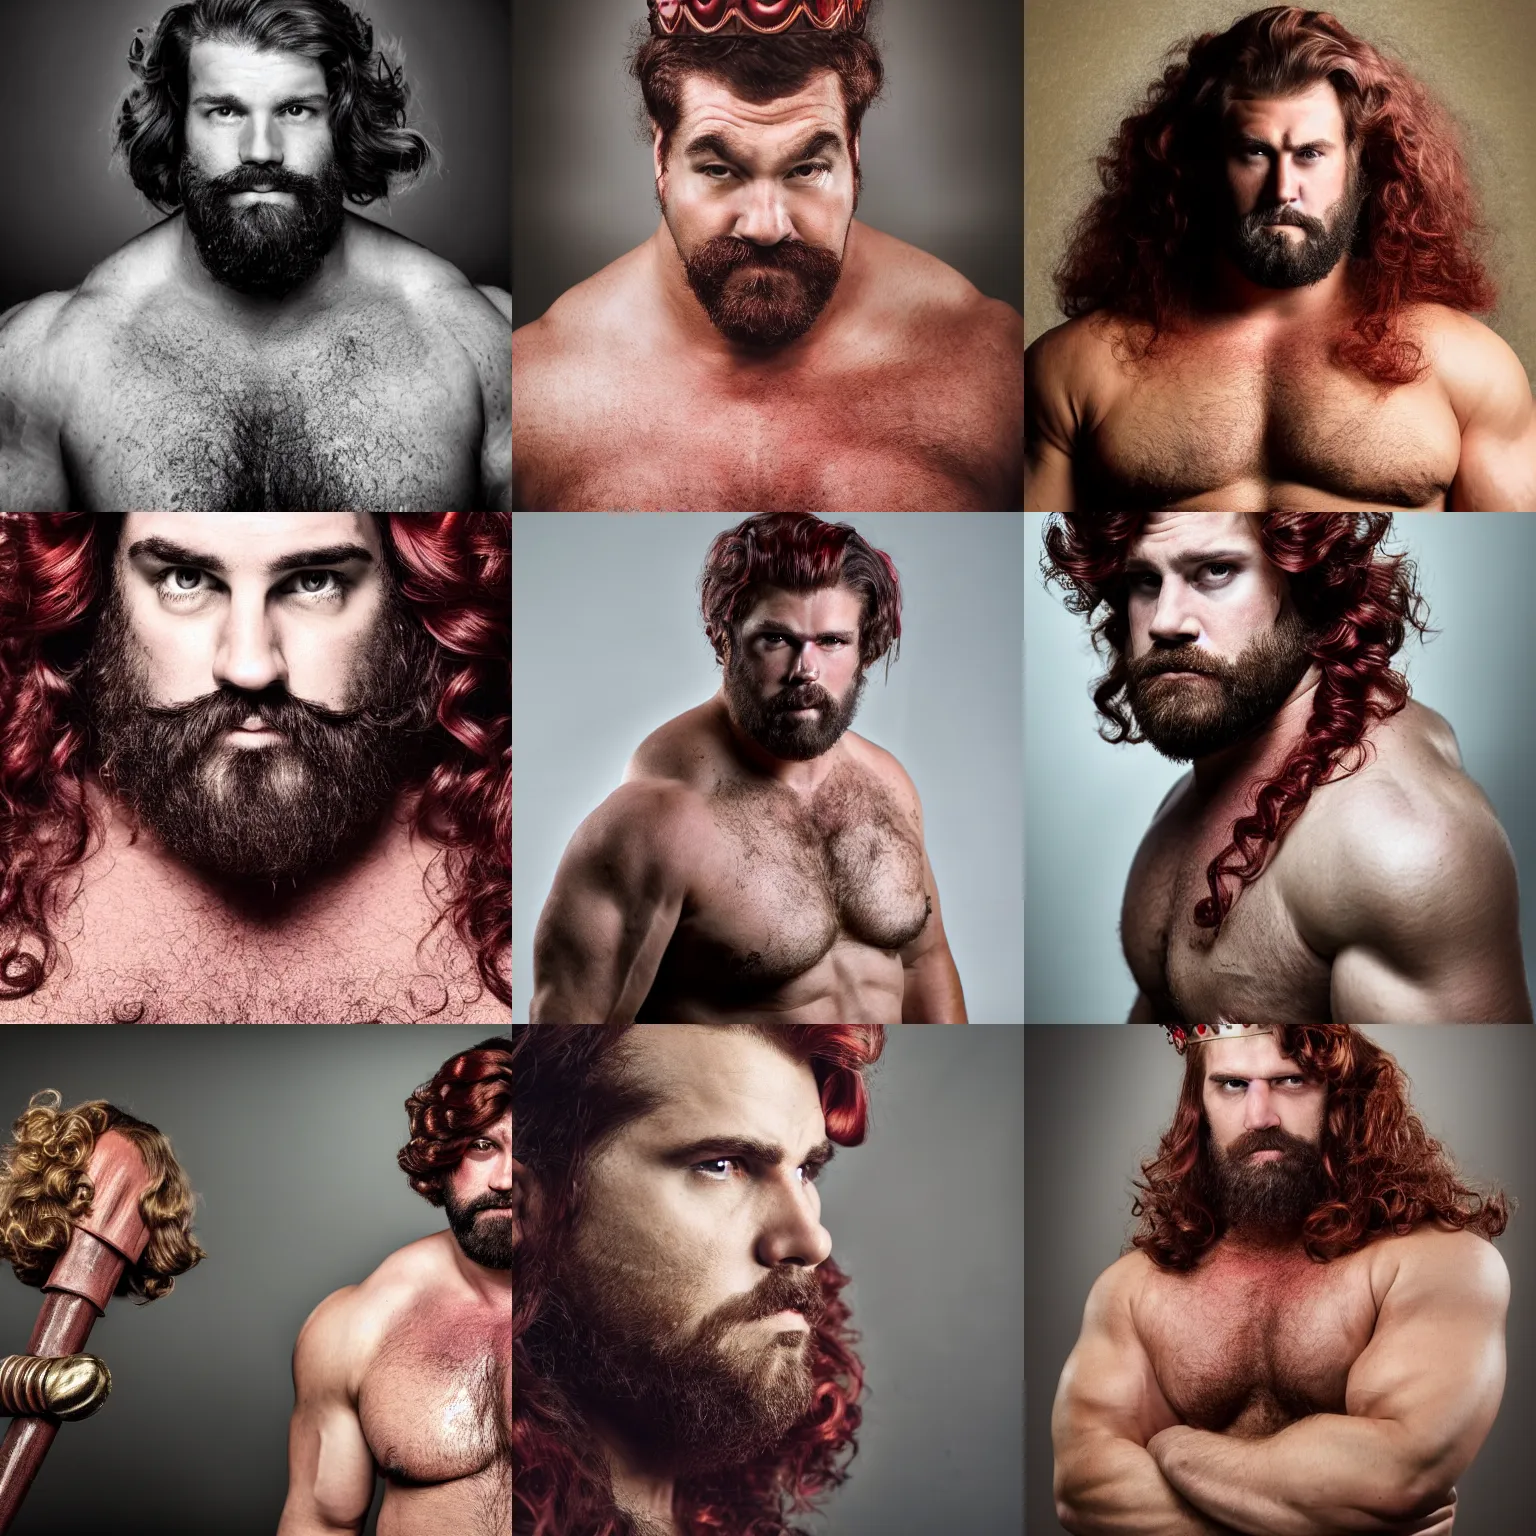 Prompt: portrait of a burly muscular man with dark - red curling hair man with a crown and a warm yet serious gaze, photography